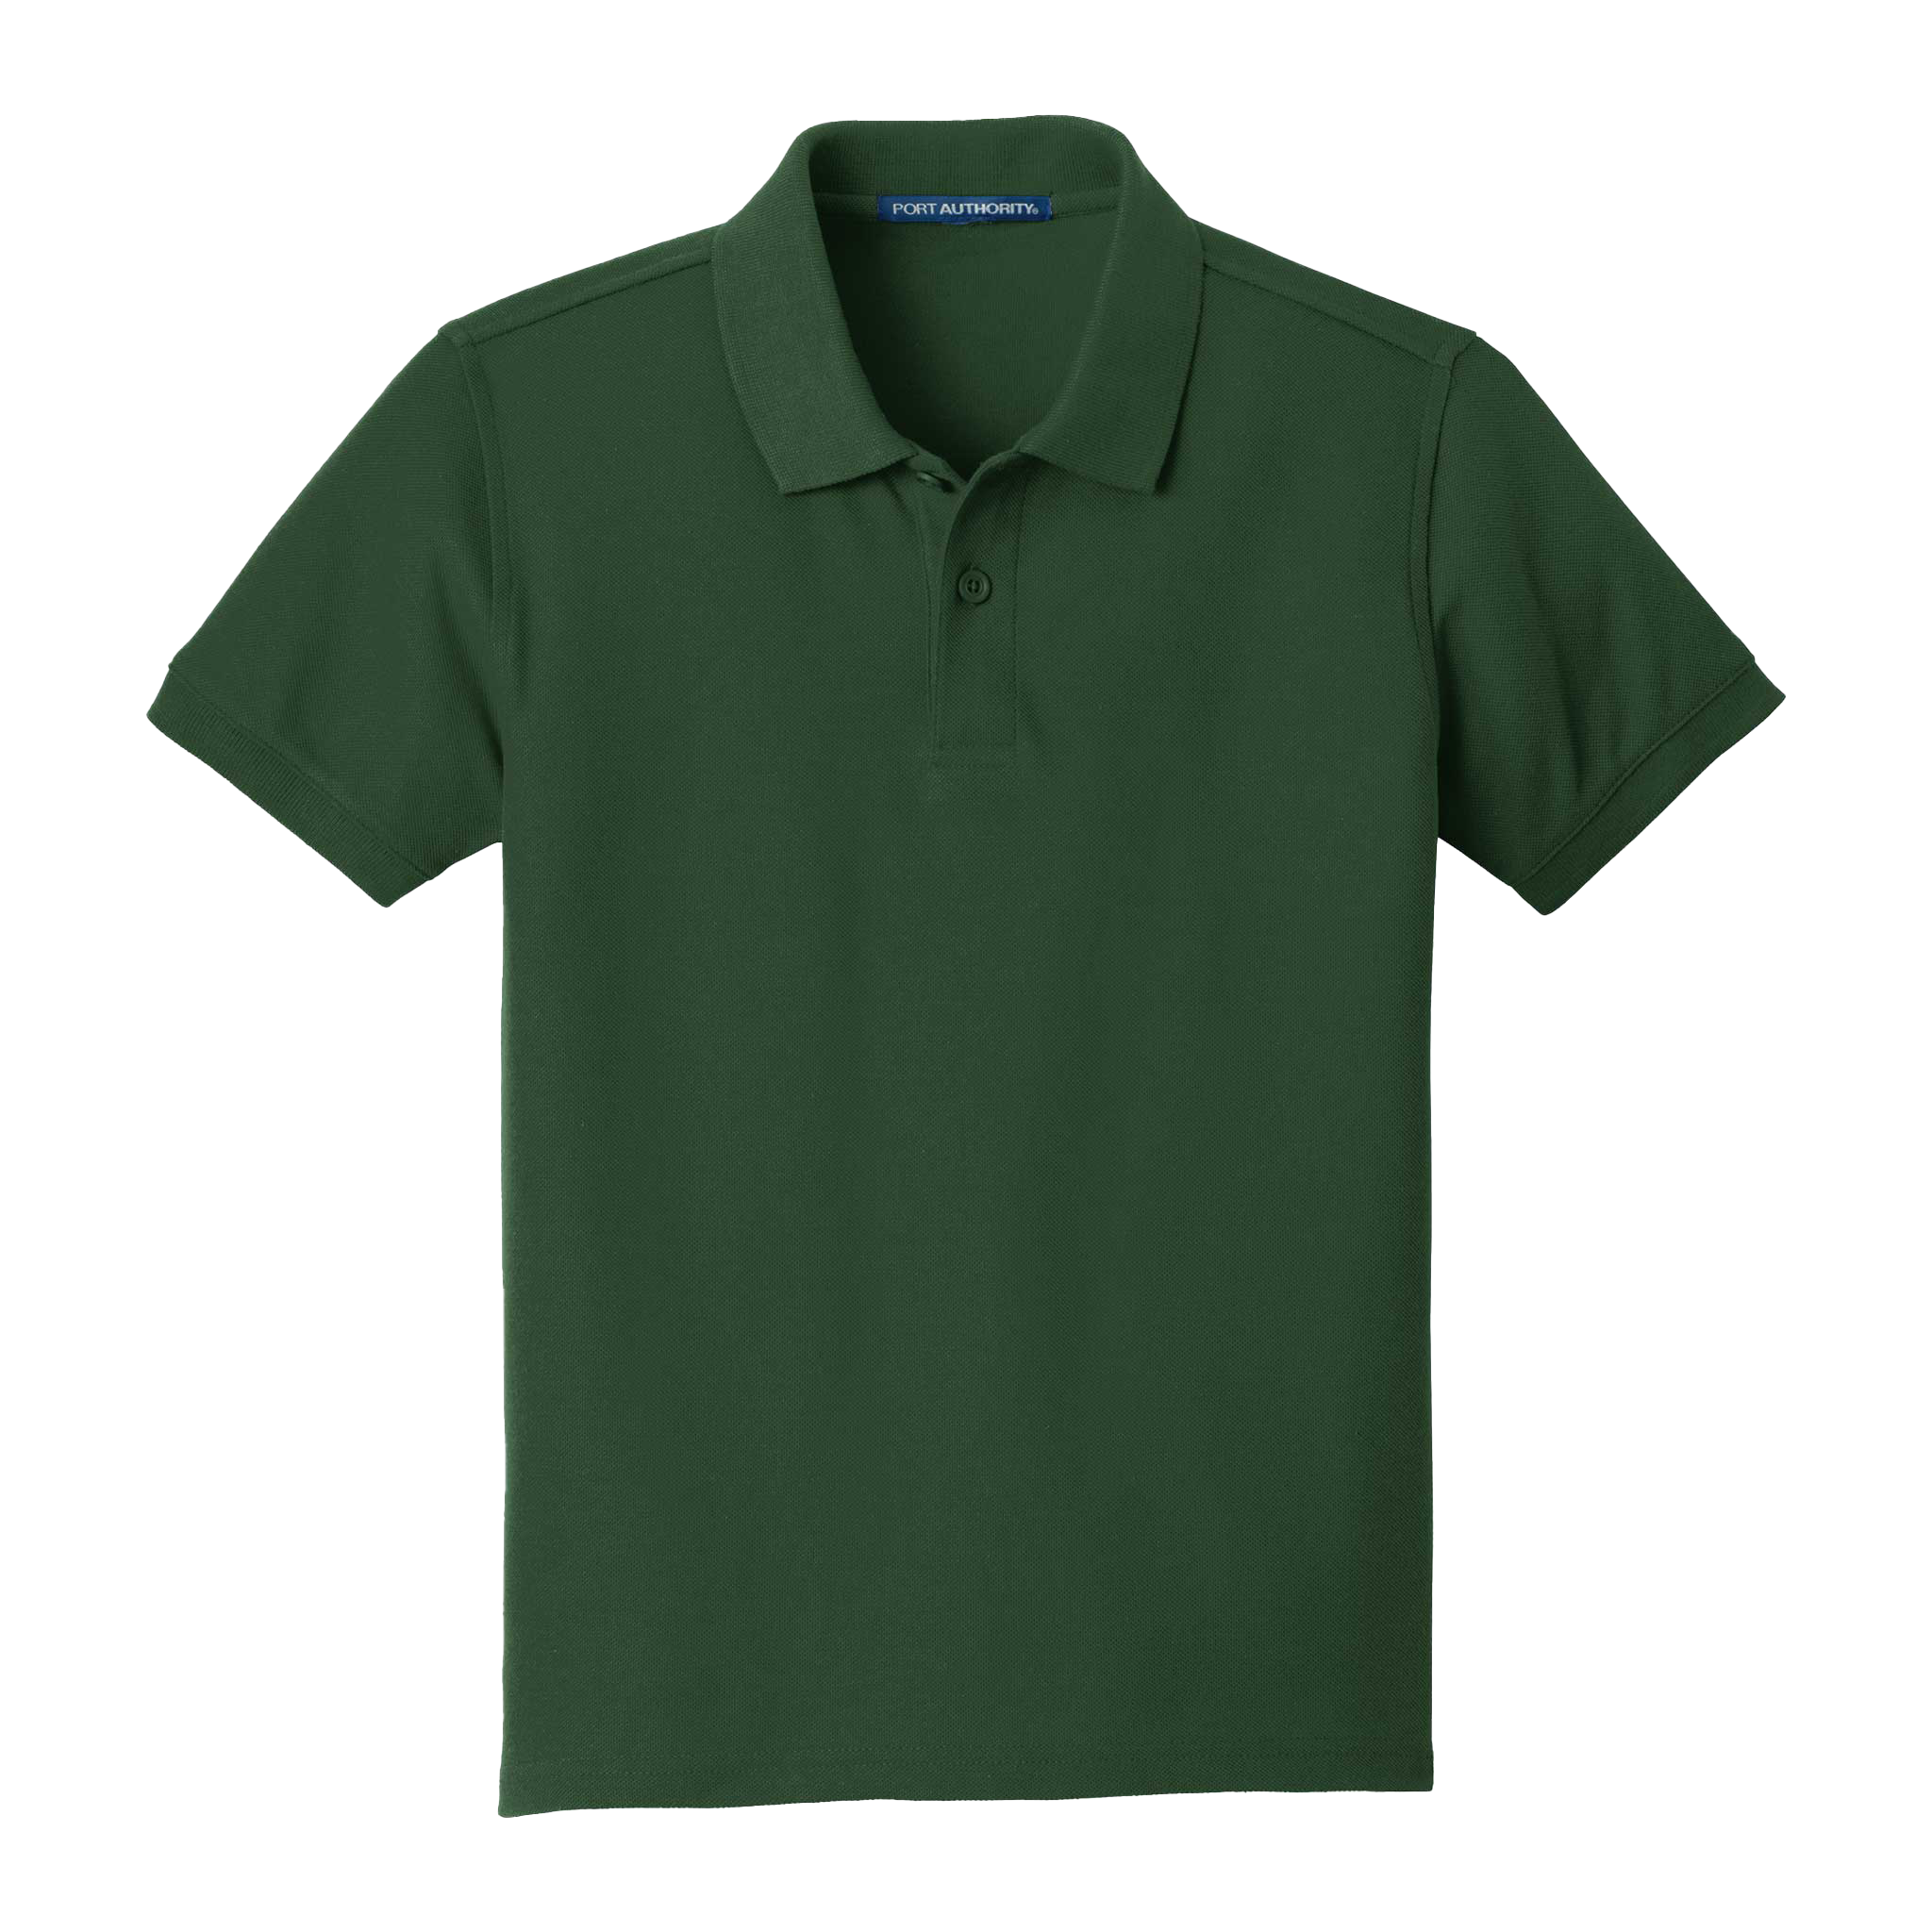 Y100.Forest-Green:XL.TCP